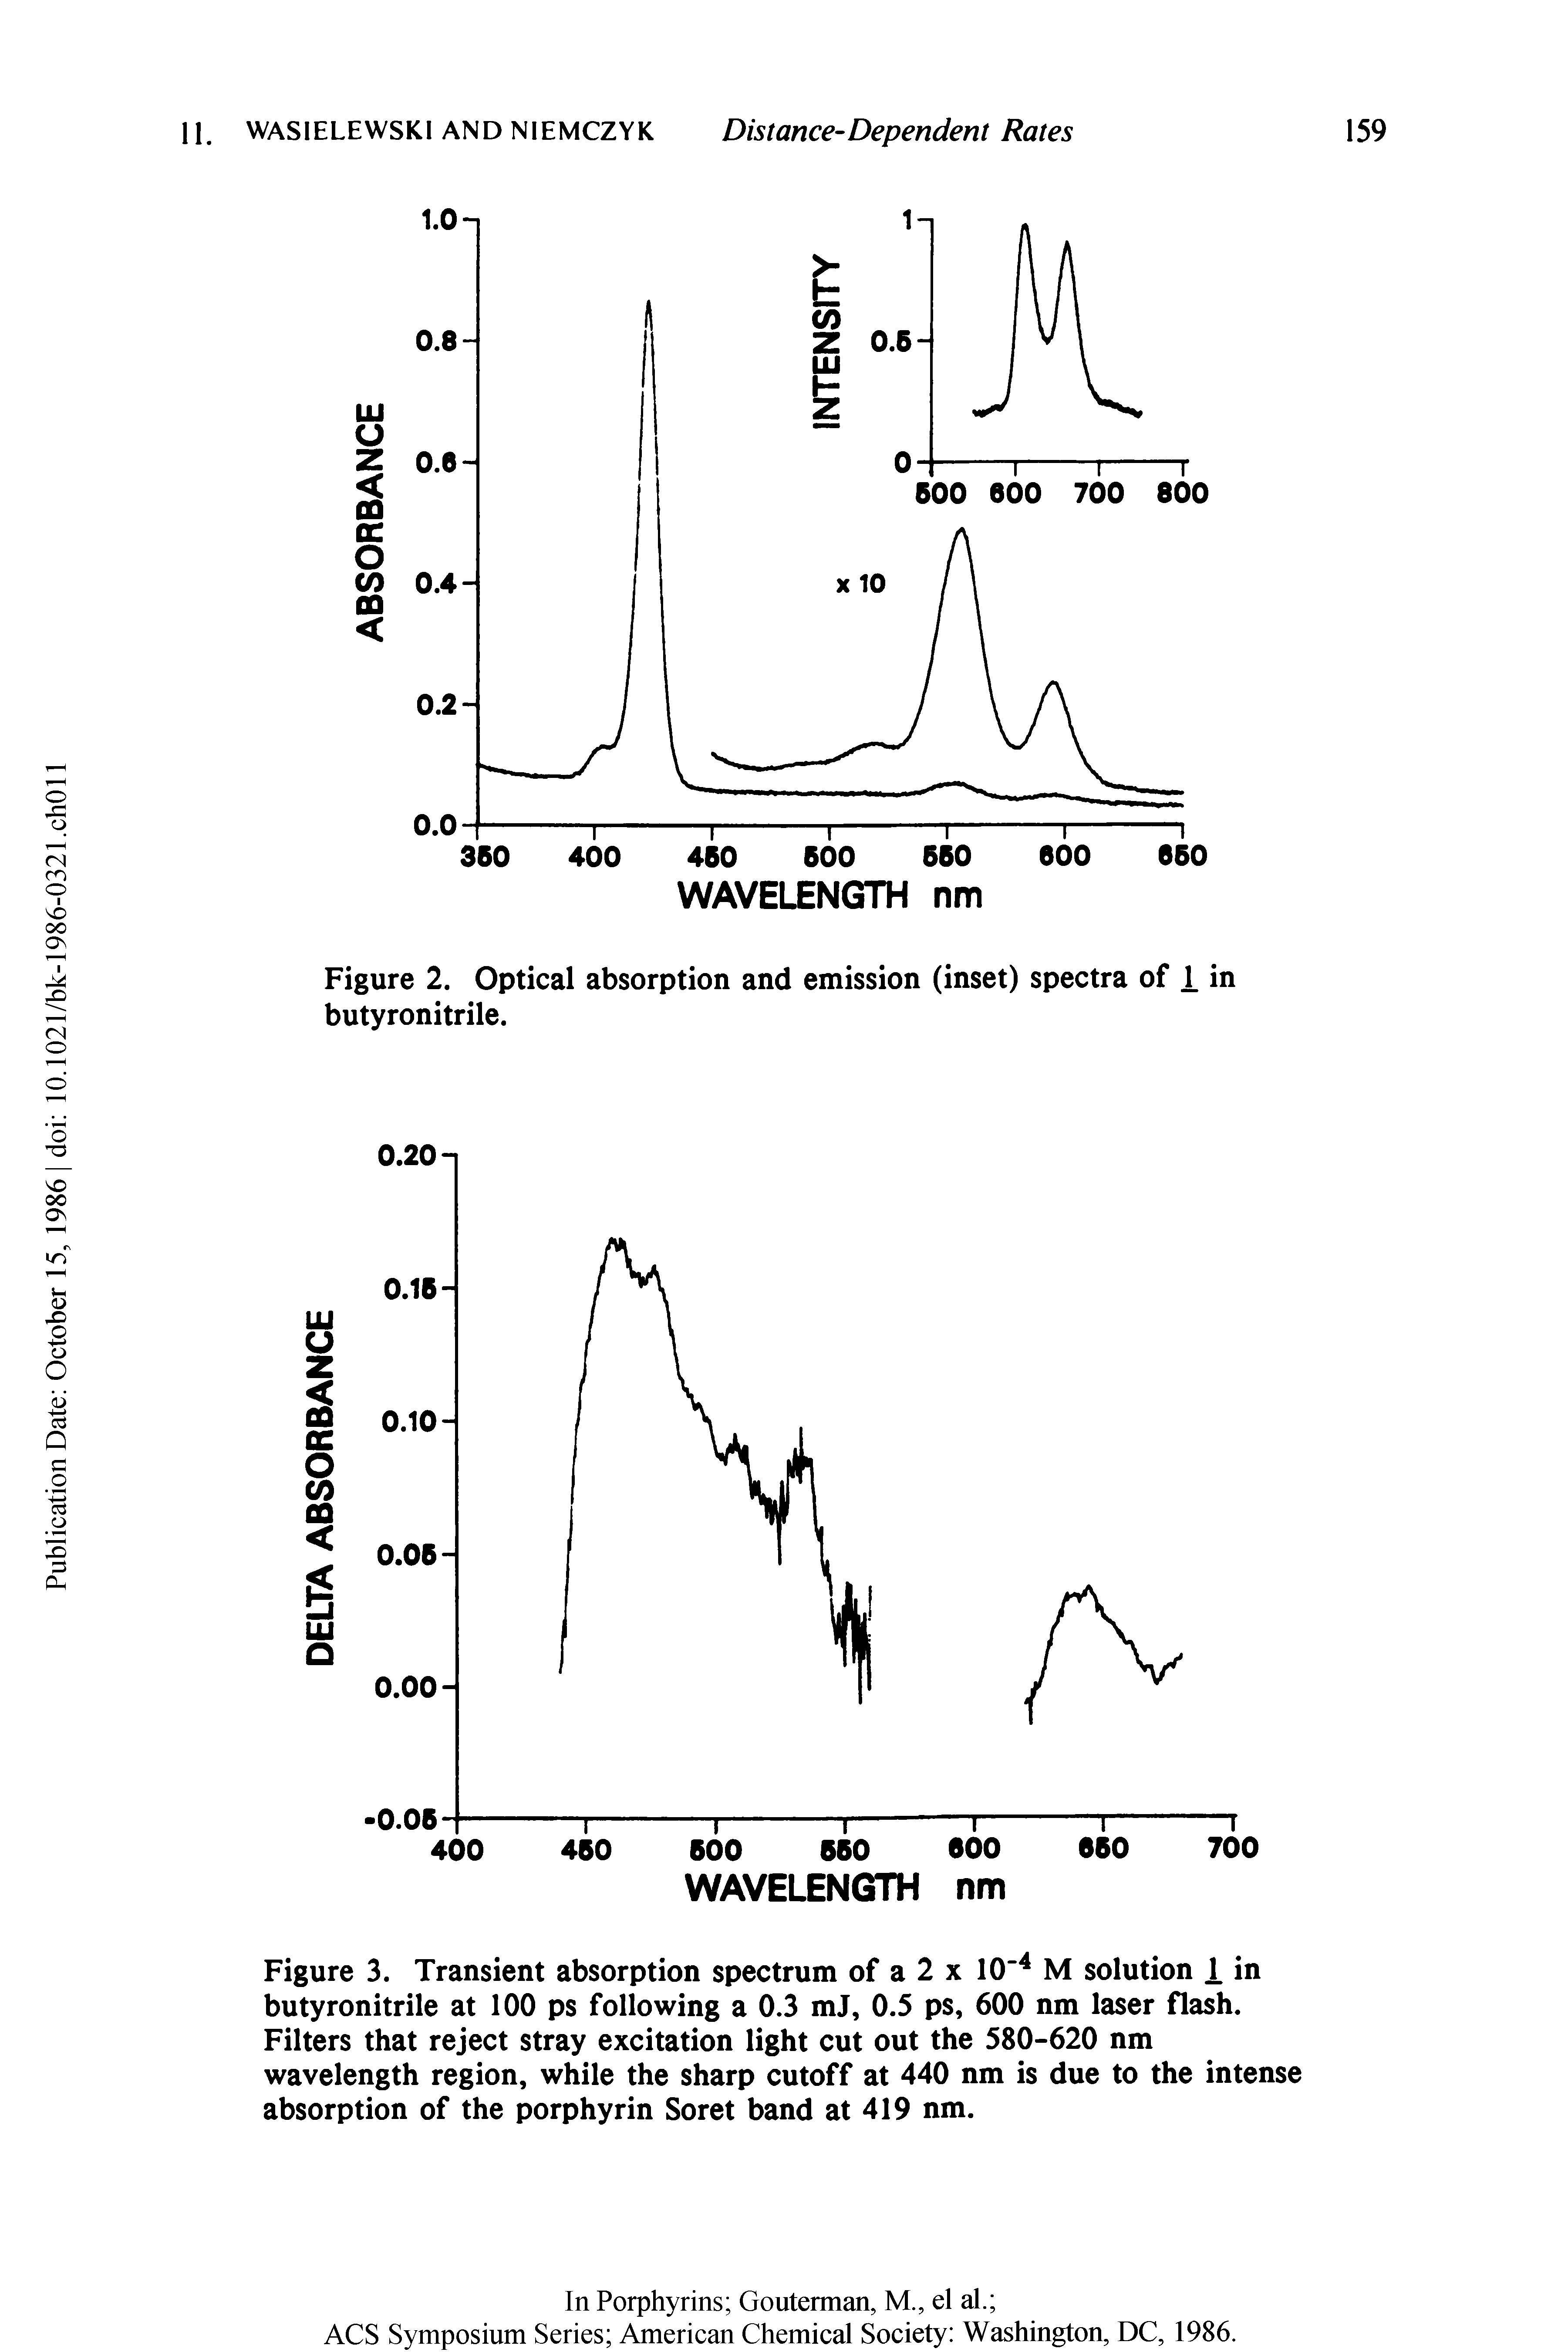 Figure 2. Optical absorption and emission (inset) spectra of 1 in butyronitrile.